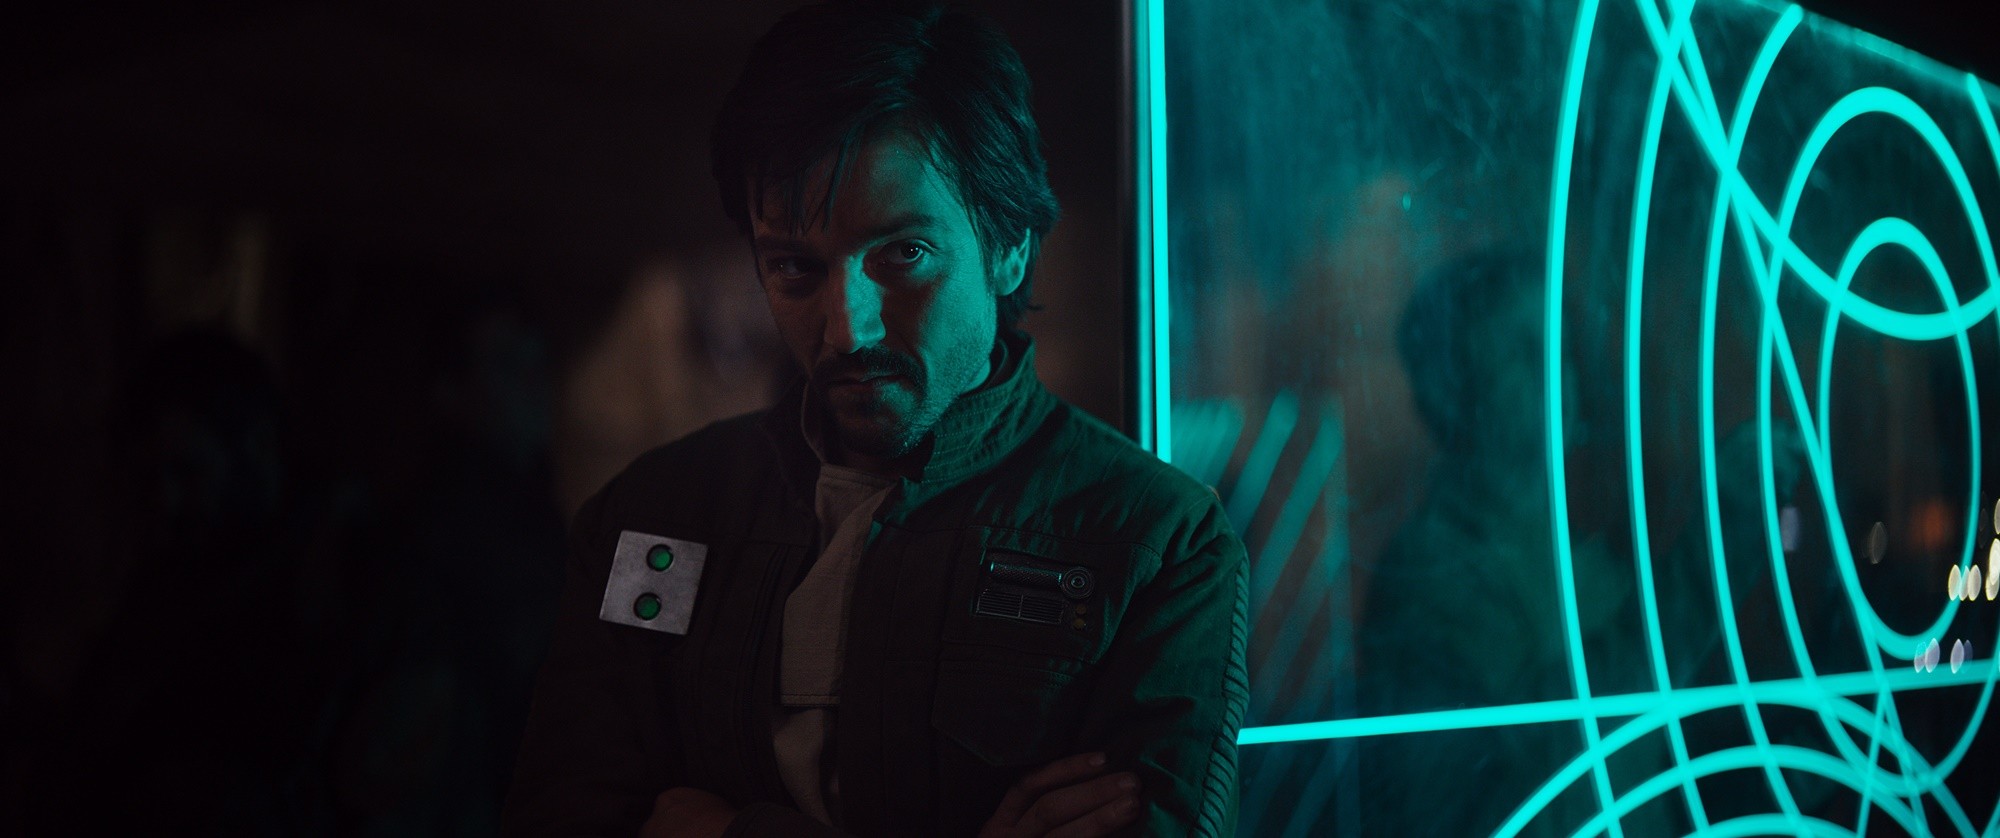 Diego Luna in Walt Disney Pictures' Rogue One: A Star Wars Story (2016)